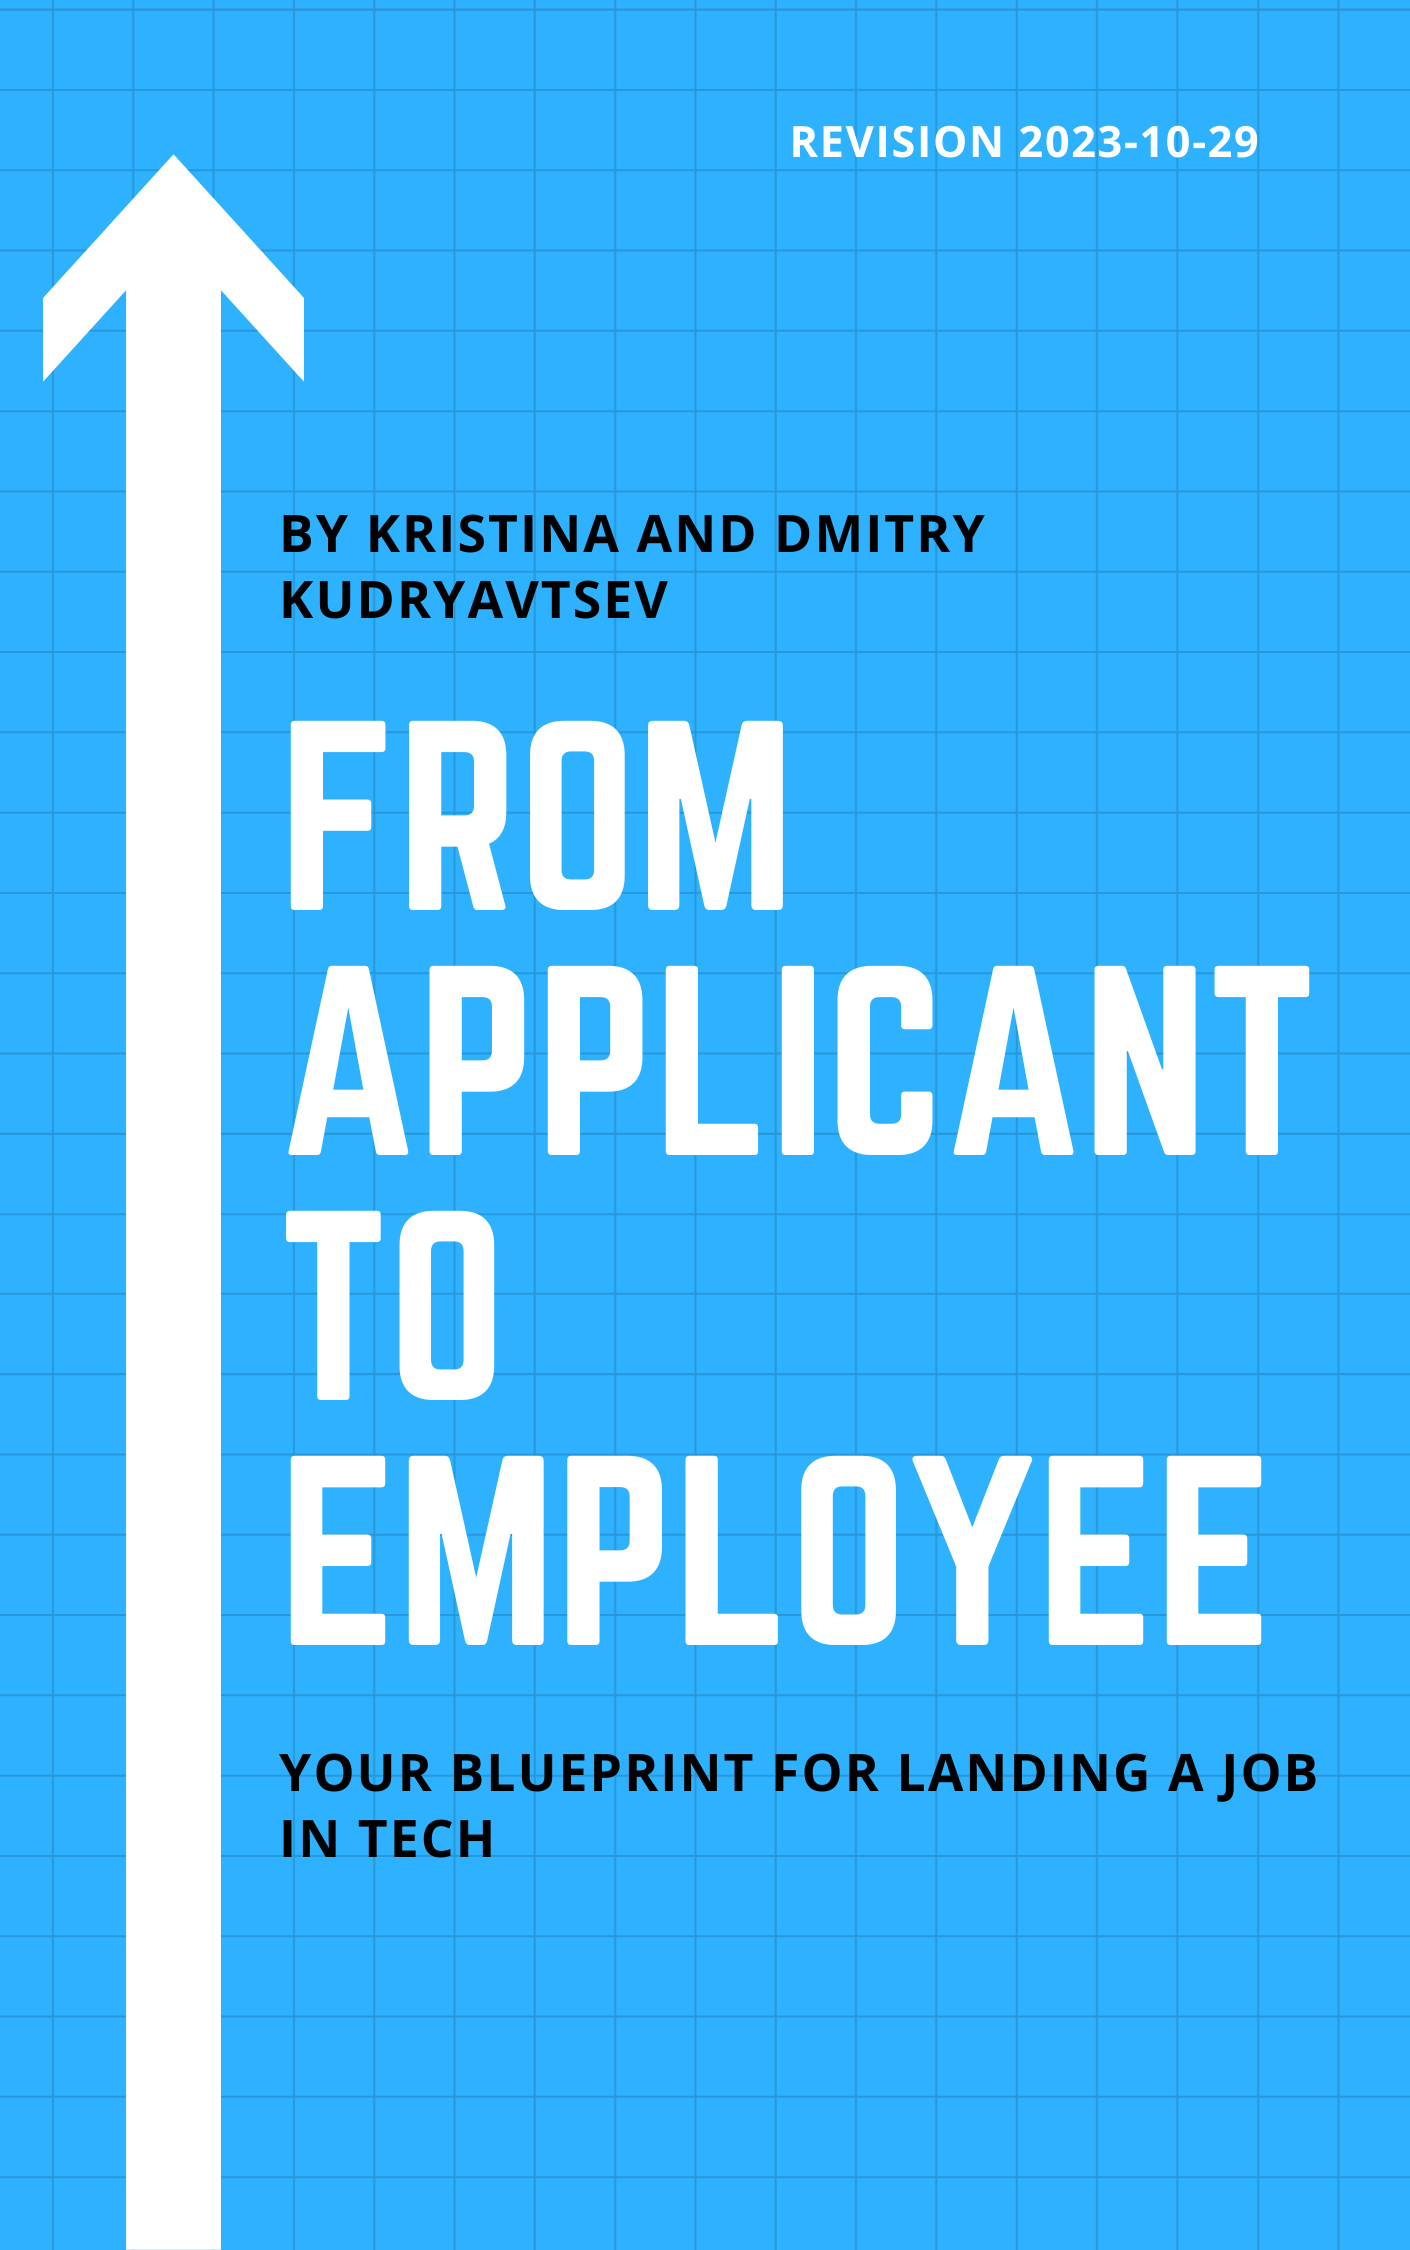 From Applicant to Employee - Your blueprint for landing a job in tech